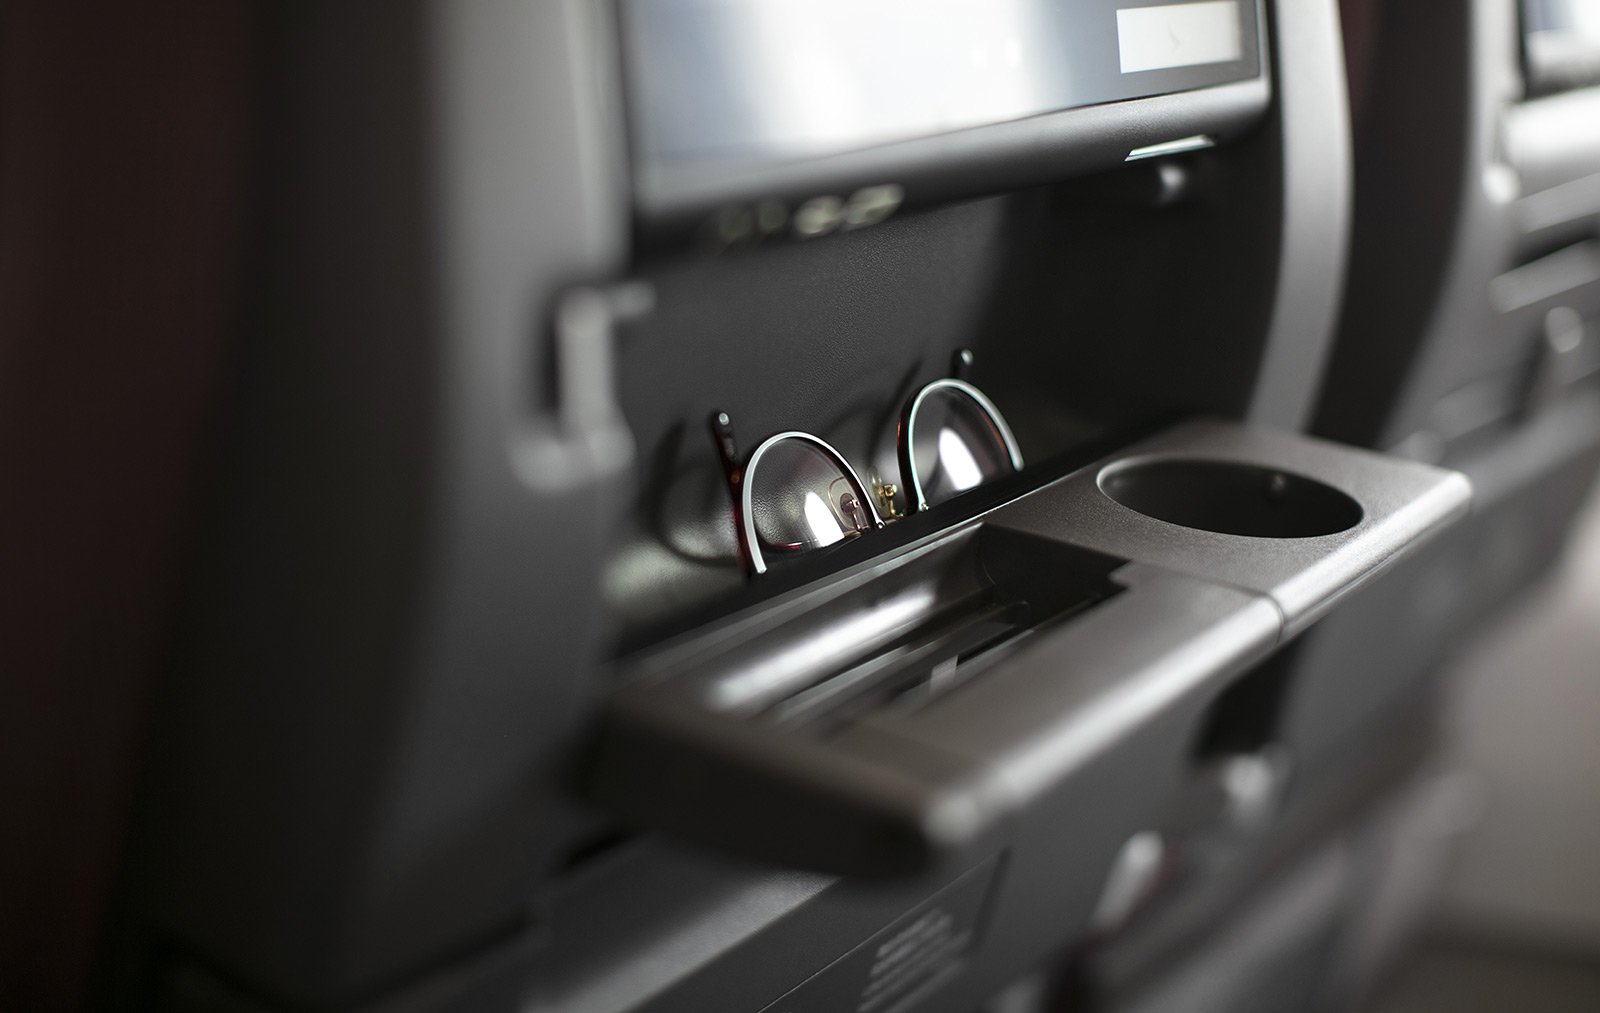 A pair of eyeglasses on the drop-down tablet holder on Cathay Pacific's new Airbus A321neo